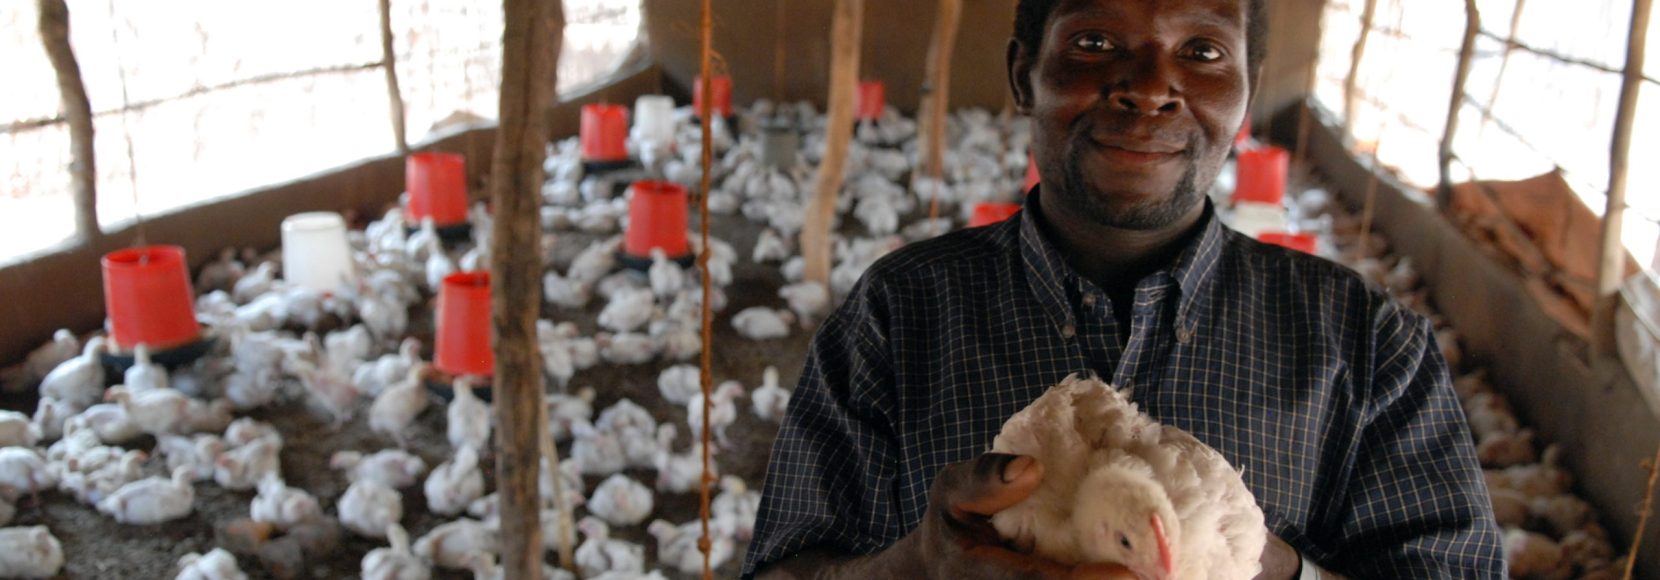 Chicken outgrower Domingos Alfordo Torres. Torres works closely with TechnoServe client Novos Horizontes Poultry in Nampula, Mozambique. Chicken is the main source of protein in the area. TechnoServe addresses global poverty.